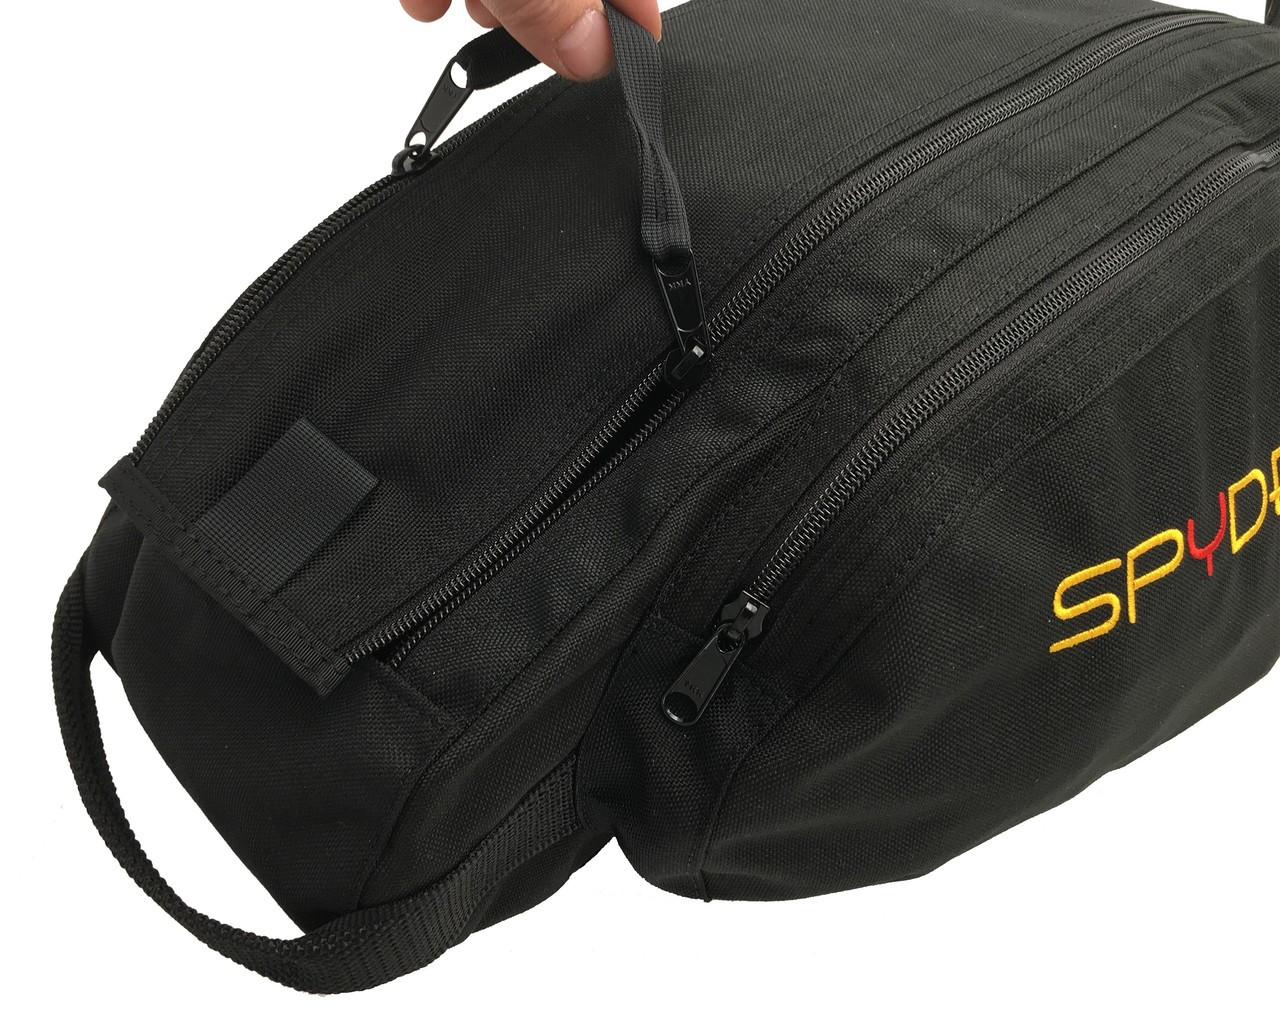 Spyderbags™ - Custom Designed to Use Every Inch of the Side Cases - 1-Pair (F3T-LTD Models All Years)